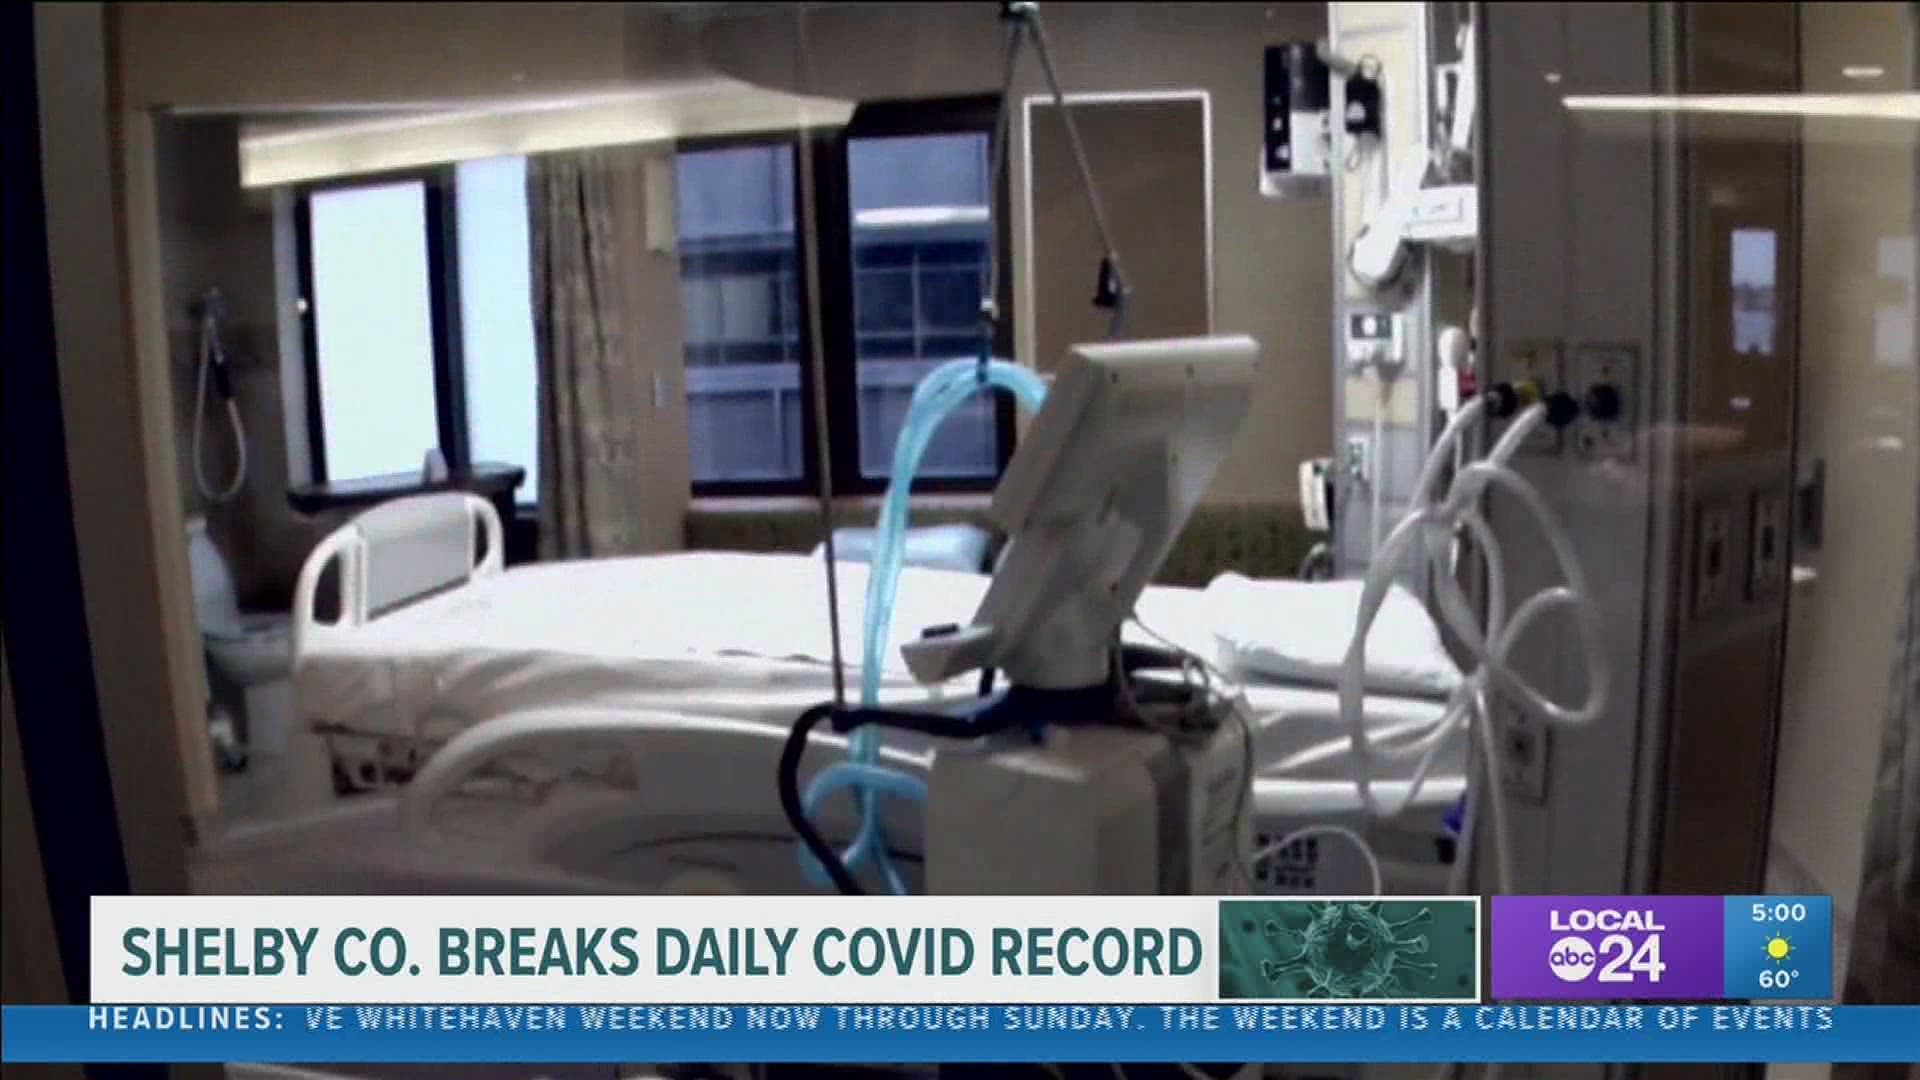 Tuesday saw new record highs for new COVID-19 cases and hospitalizations in Shelby County.